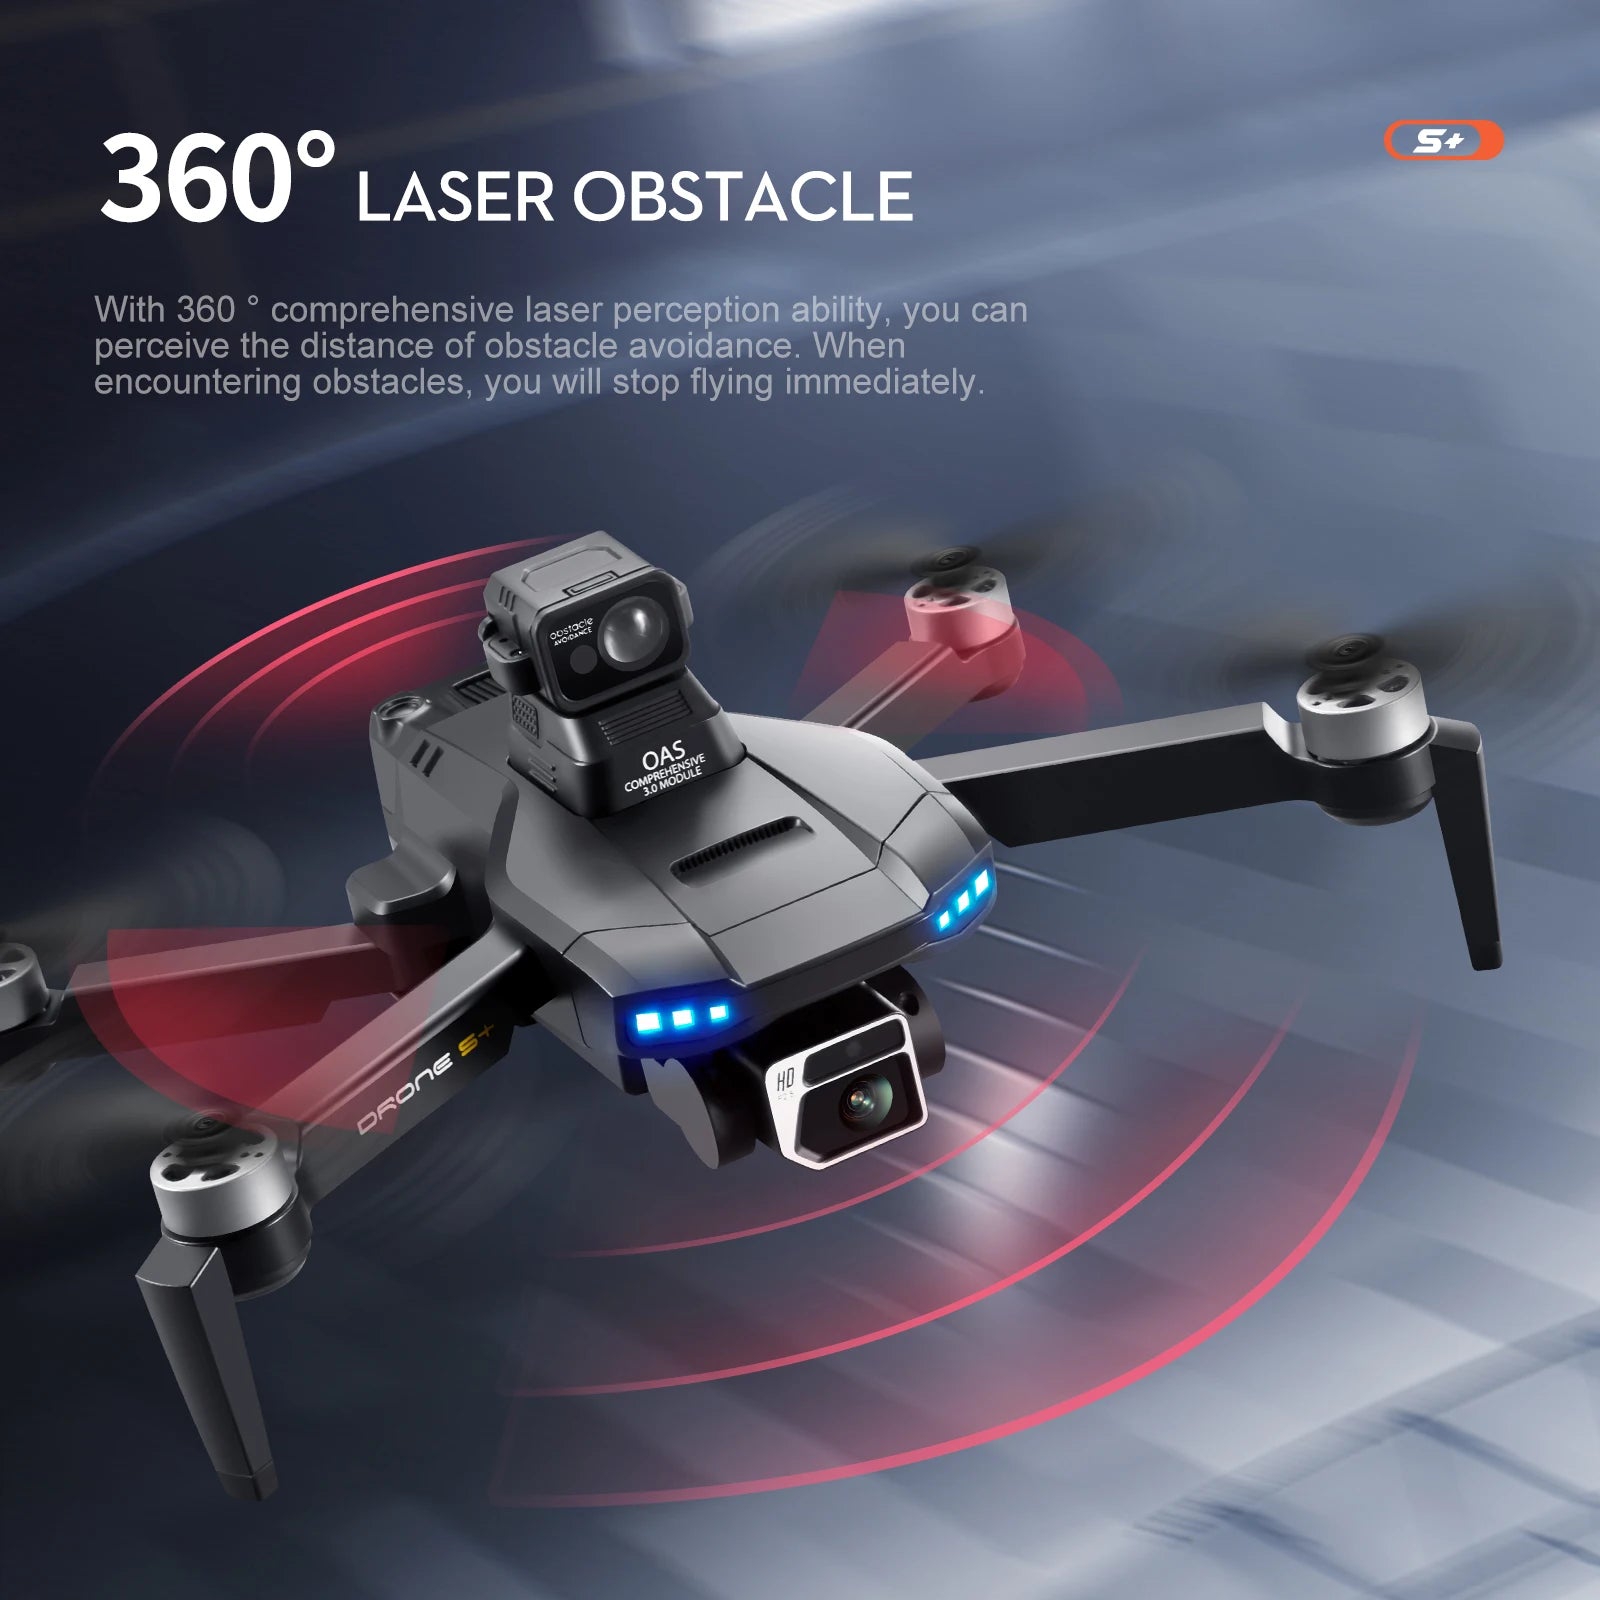 S+ GPS Drone, 5+ 3608 LASER OBSTACLE With 360 comprehensive laser perception ability, you can